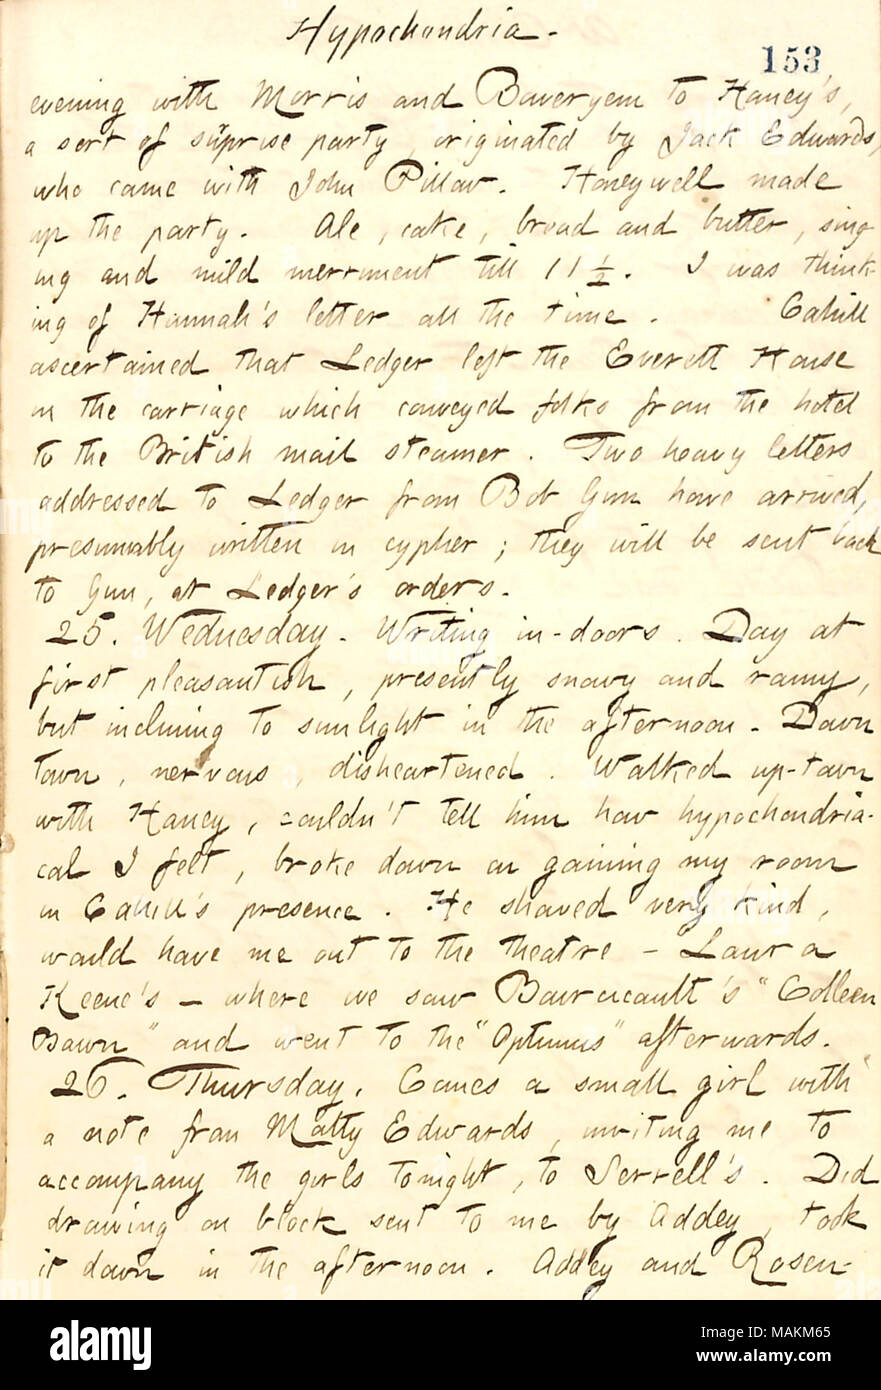 Mentions a night out at the theater with Frank Cahill.  Transcription: Hypochondria. evening with [James] Morris and [George] Boweryem to [Jesse] Haney ?s, a sort of surprise party, originated by Jack Edwards, who came with John Pillow. [Charles] Honeywell made up the party. Ale, cake, bread and butter, singing and mild merriment till 11 1/2. I was thinking of Hannah [Bennett] ?s letter all the time. [Frank] Cahill ascertained that [Arthur] Ledger left the Everett House in the carriage which conveyed folks from the hotel to the British mail steamer. Two heavy letters addressed to Ledger from B Stock Photo